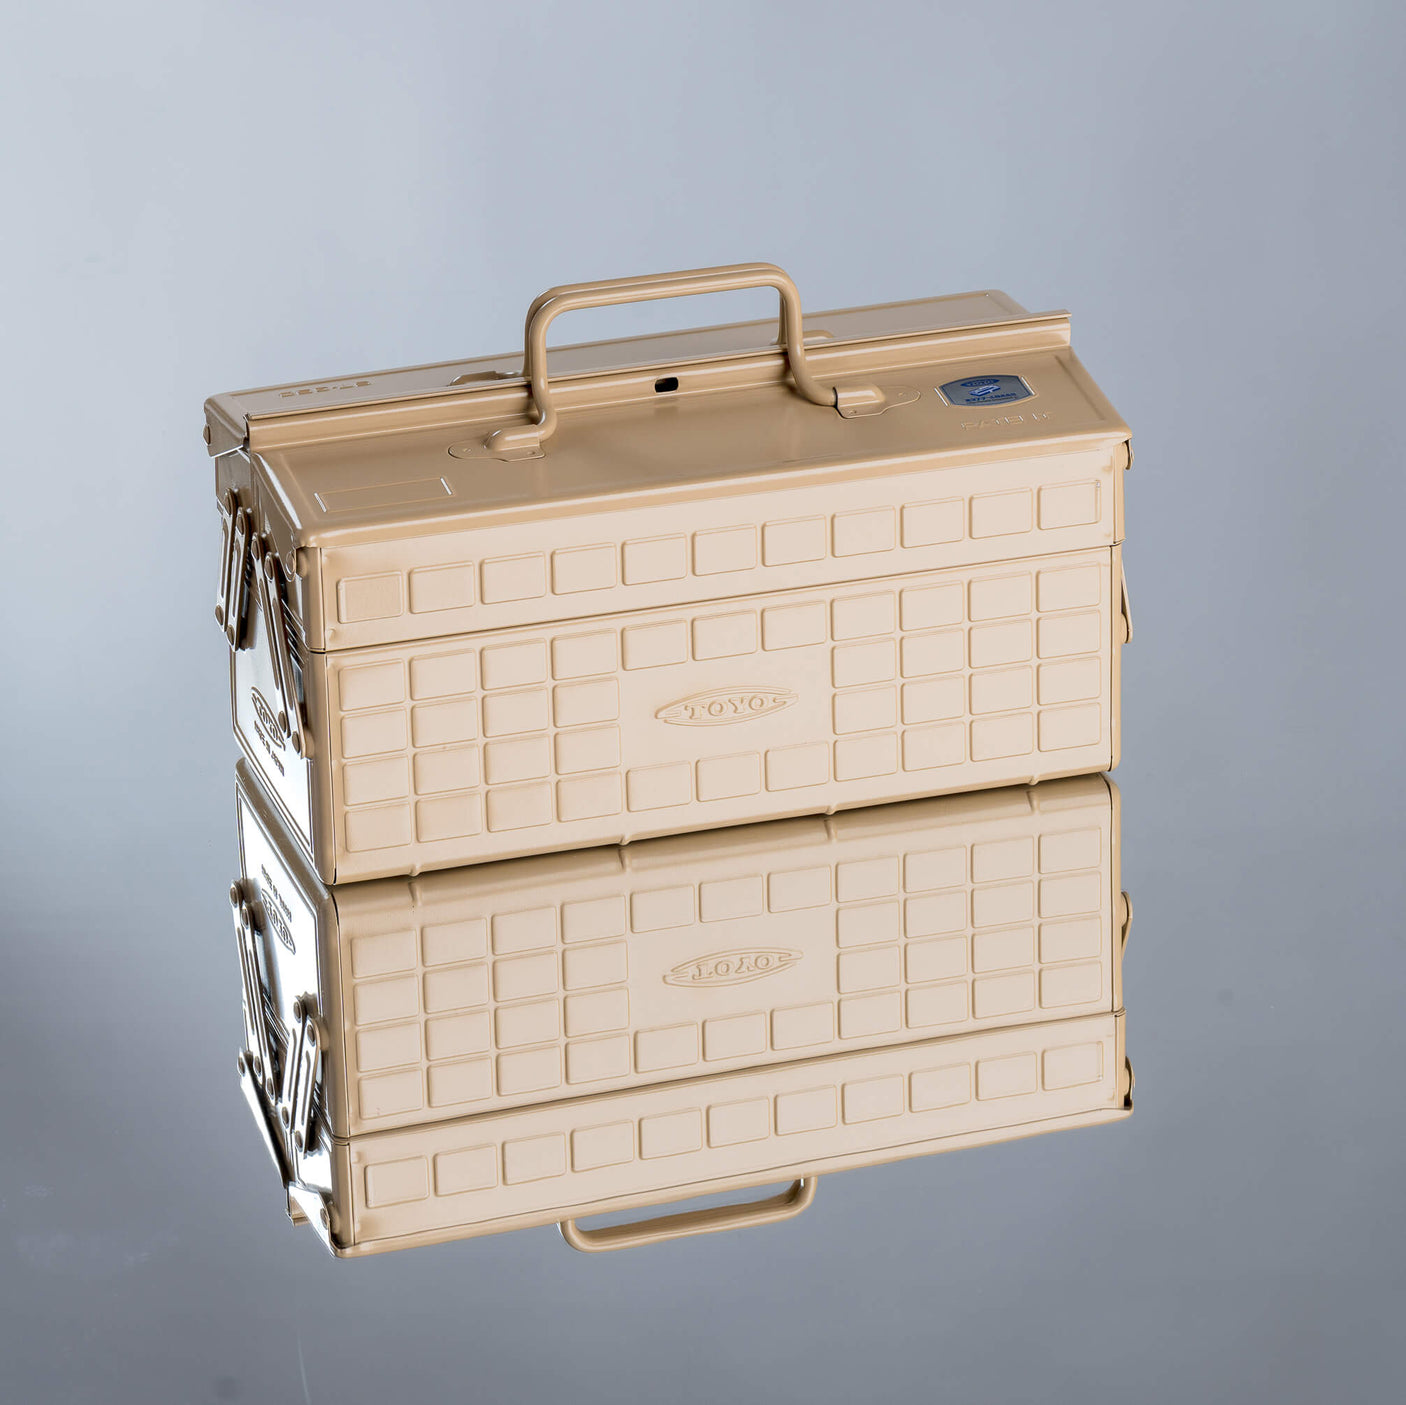 TOYO Cantilever Toolbox ST-350 BG (Beige)